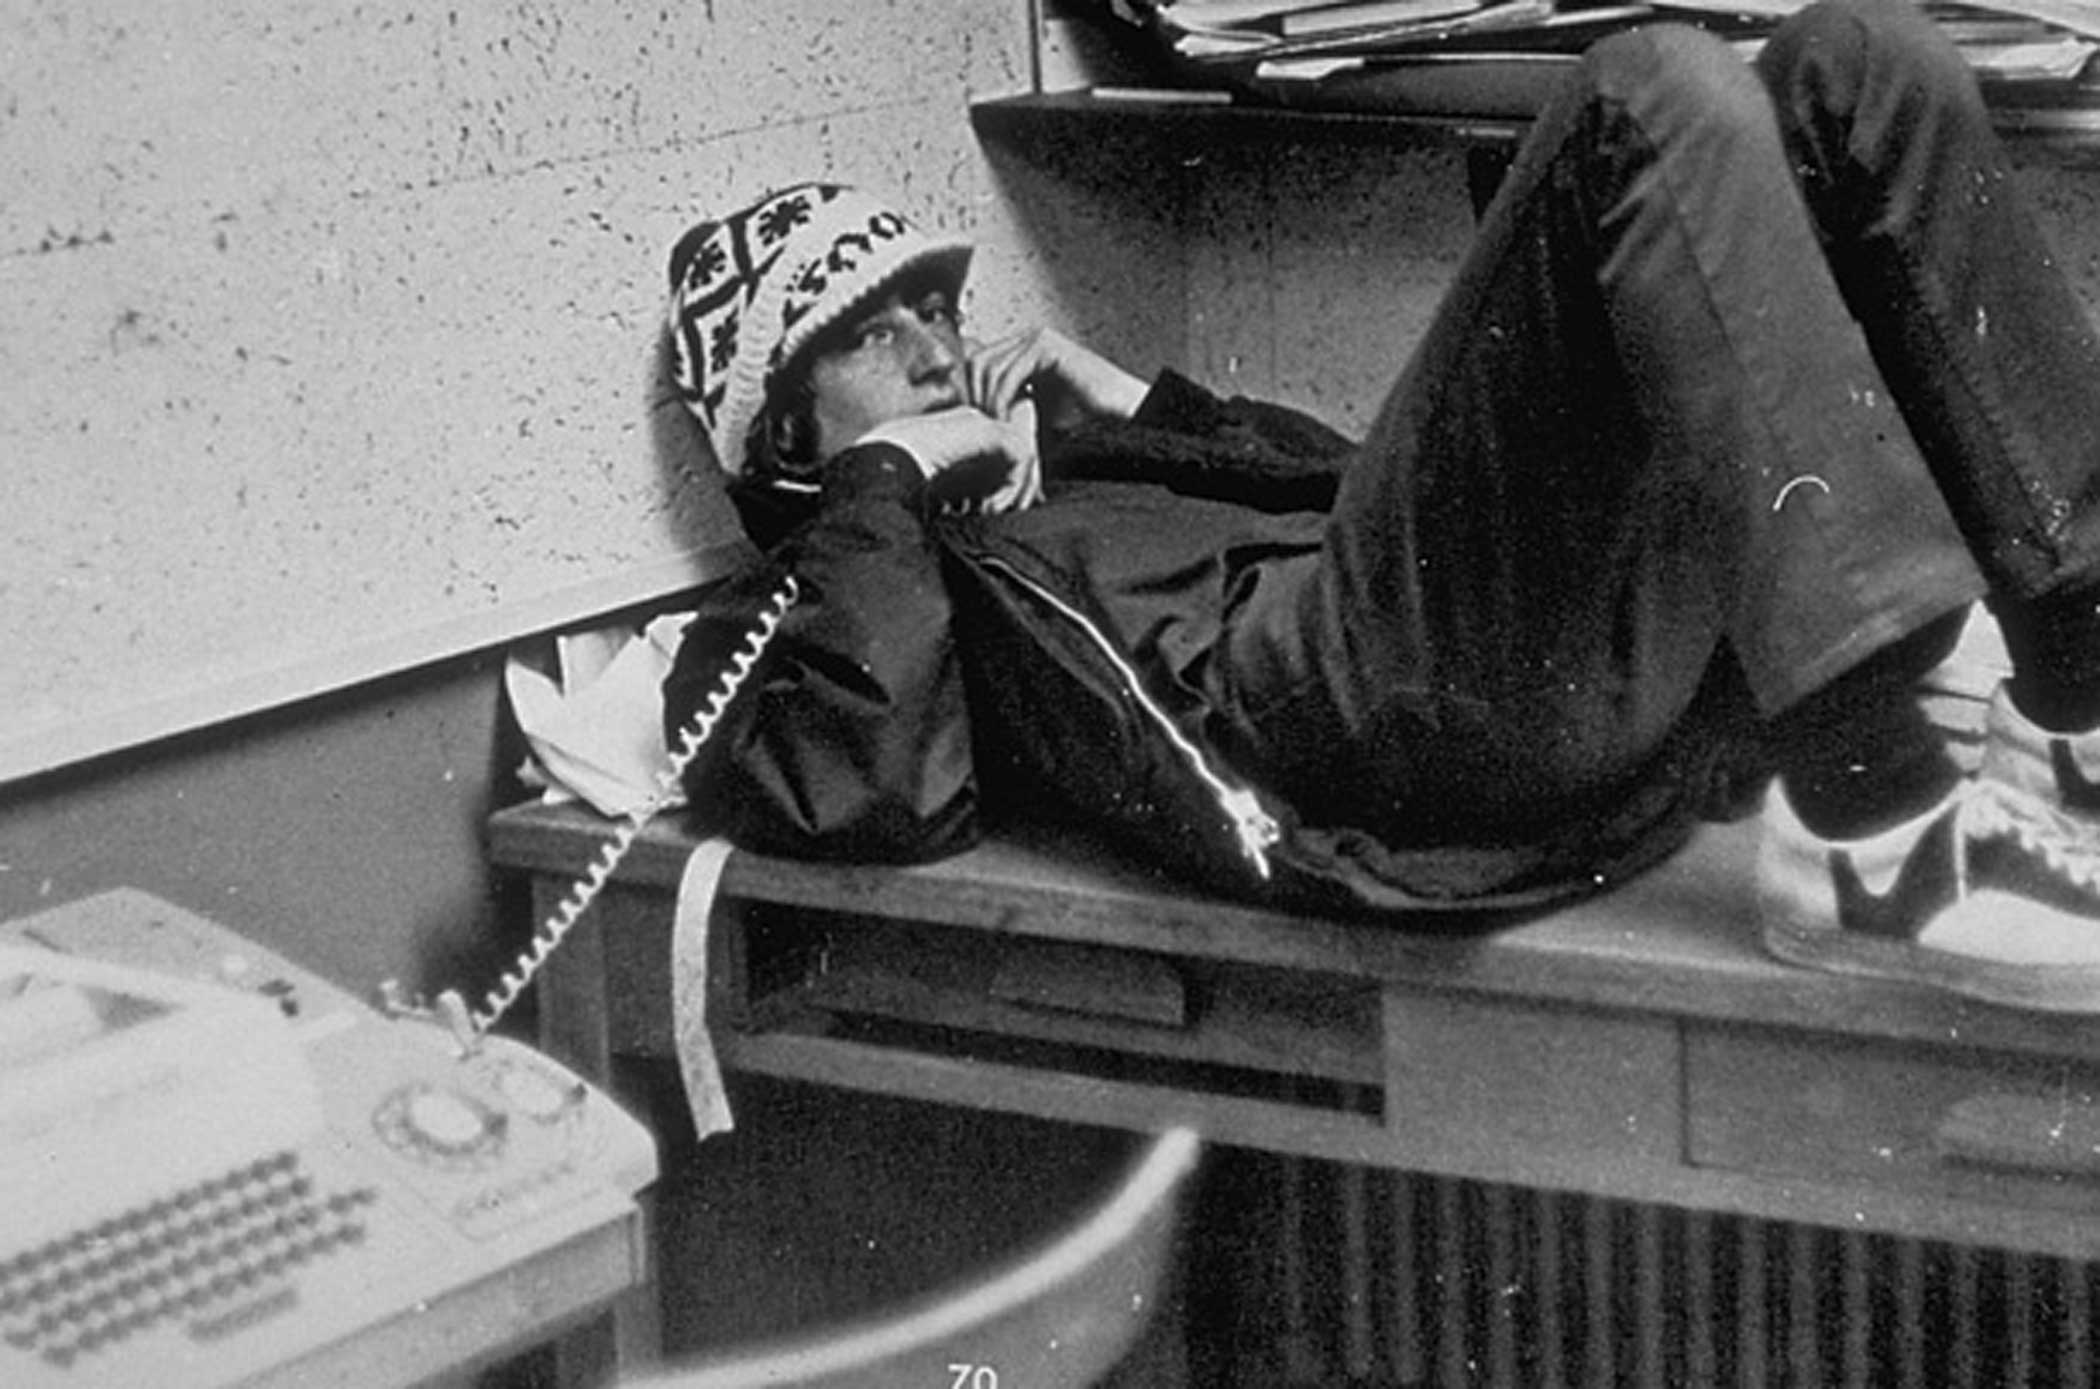 Future billionaire computer wiz Bill Gates reclining on desktop &amp; talking on phone while attending private Lakeside School.Filing Place: TC 104378Subject Date: 0/0/1973Last Published: January 25, 1999Series: TIMETitle: Caption: Future billionaire computer wiz Bill Gates reclining on desktop &amp; talking on phone while attending private Lakeside School.City: SEATTLEState/Province: WACountry: USPhotographer: Photog Status: FREELANCEAgency: LAKESIDE SCHOOLSyndication By: AGENCYSubjects: Personalities: GATES, WILLIAM H. IIISource: TIMERef No: 05586784.JPGMedium: B/W TRANSPARENCY